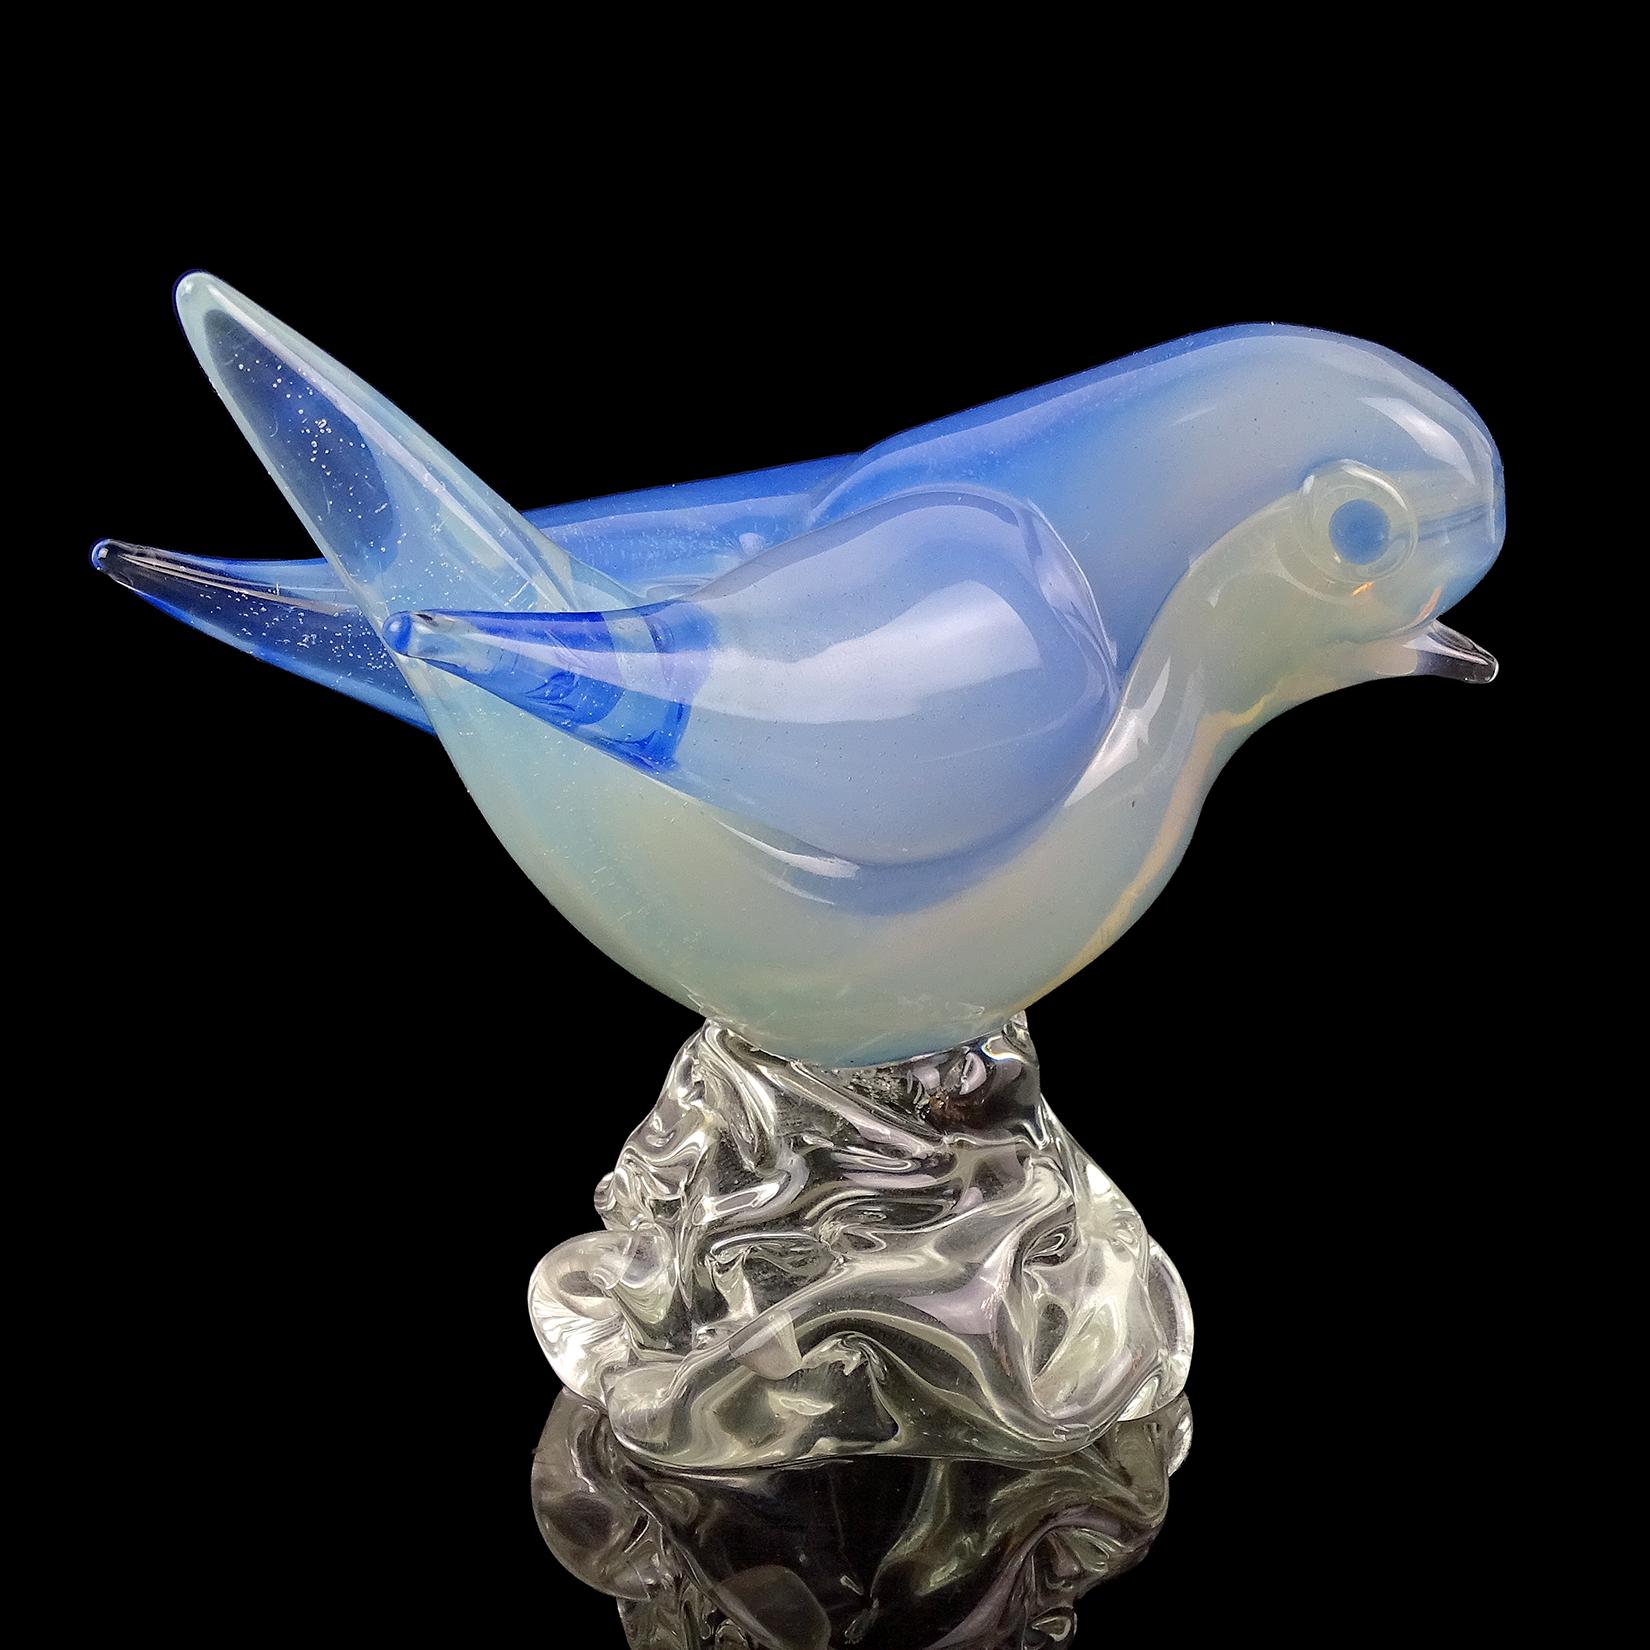 Beautiful vintage Murano hand blown Sommerso opalescent white and sky blue Italian art glass bird figurine / sculpture. Documented to the Seguso Vetri d'Arte company, circa 1950s. The cute bird has applied blue eyes, and stands on a clear glass rock